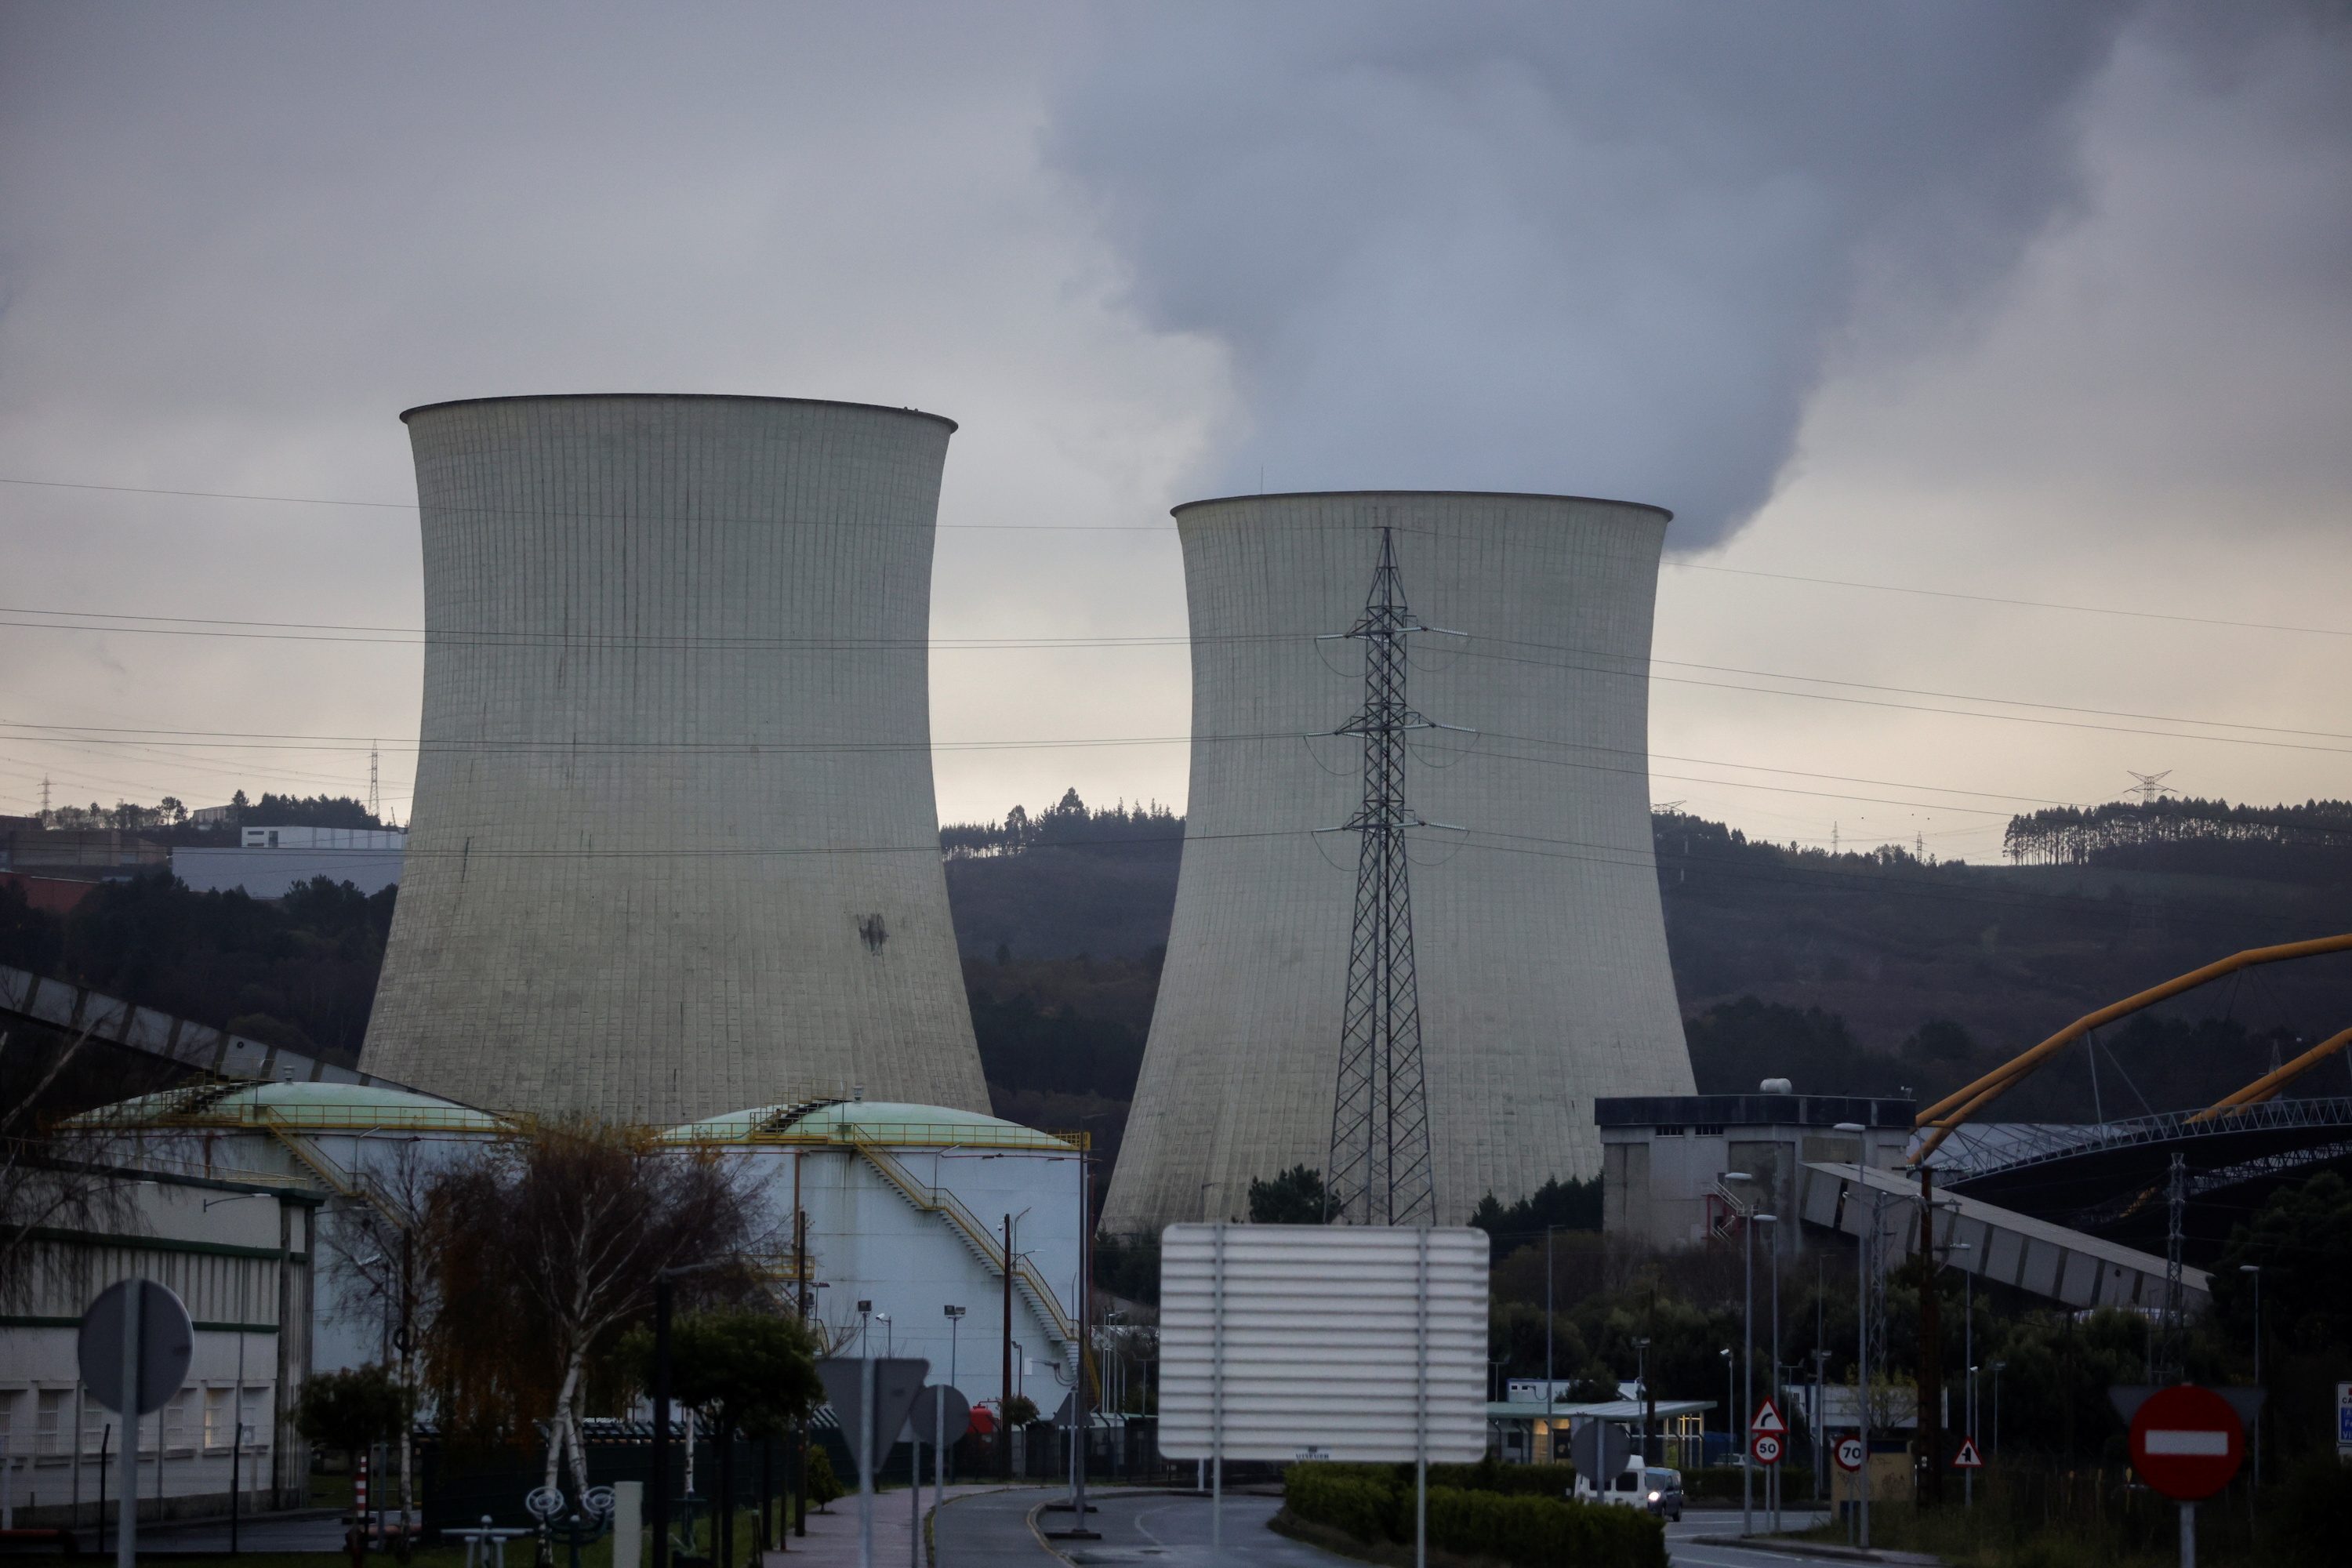 Pinched by energy crisis, Spanish coal plant slated for closure fires up